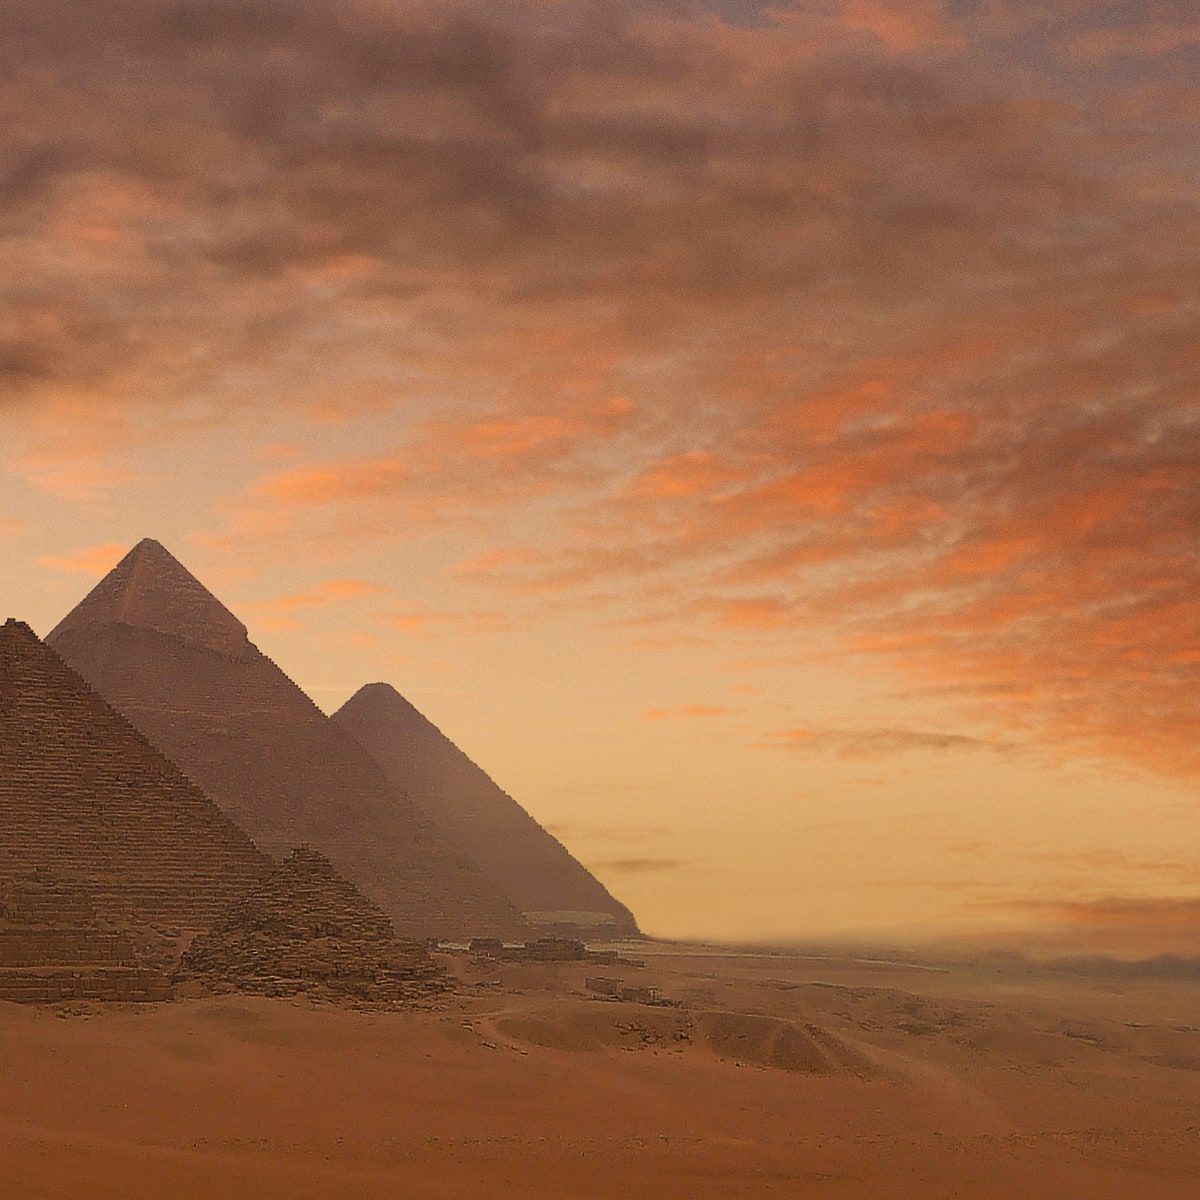 The Ancient Pyramids of Egypt: 10 Awe